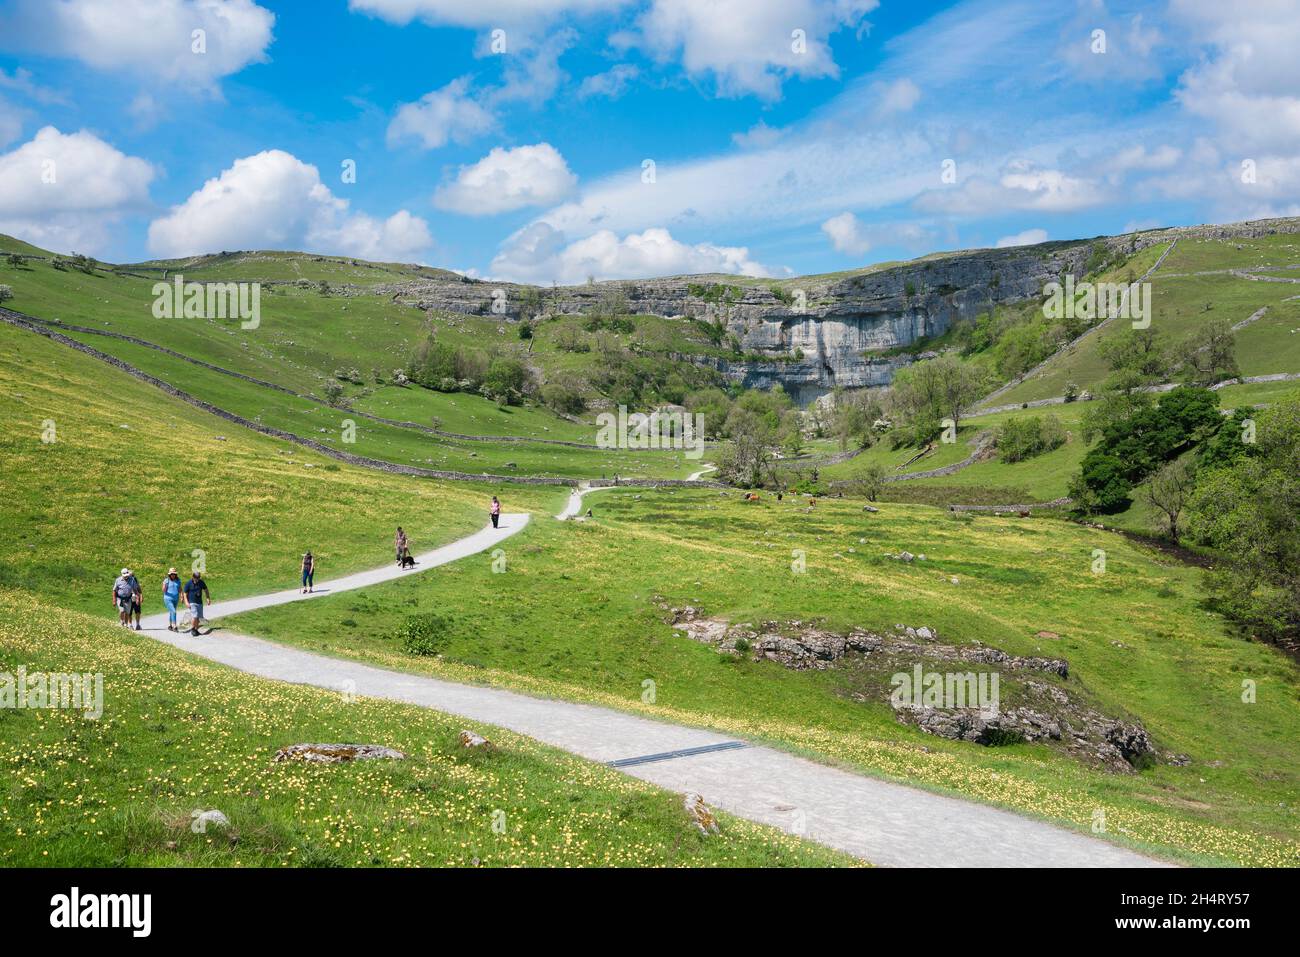 Yorkshire, view in summer of people walking the path leading from Malham to Malham Cove, a 260ft limestone cliff visible in the distance, Yorkshire UK Stock Photo